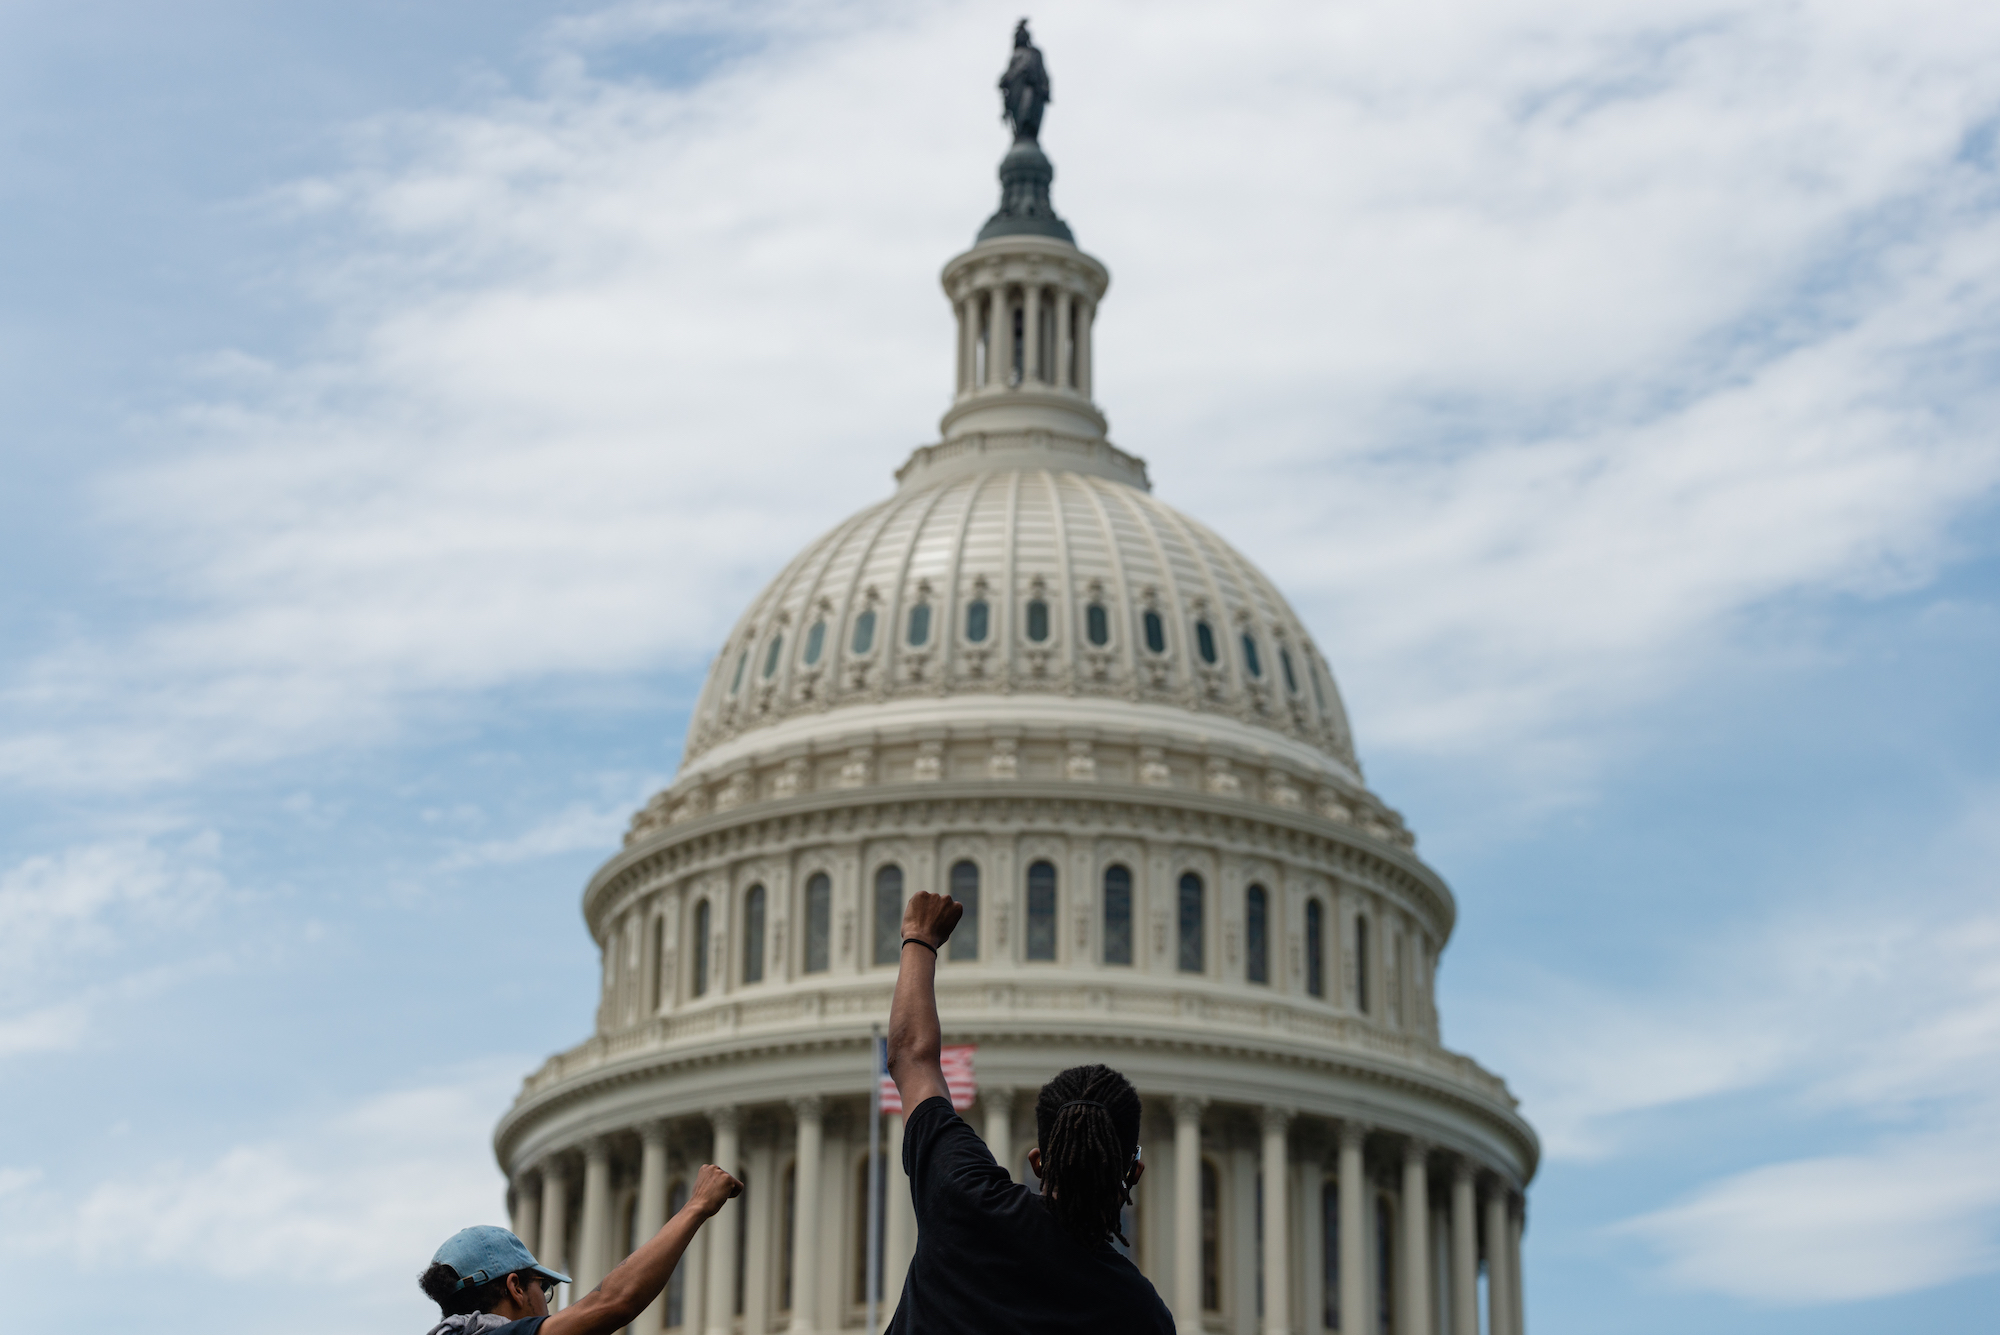 A protestor in front of the U.S. Capitol. (Eric Lee)